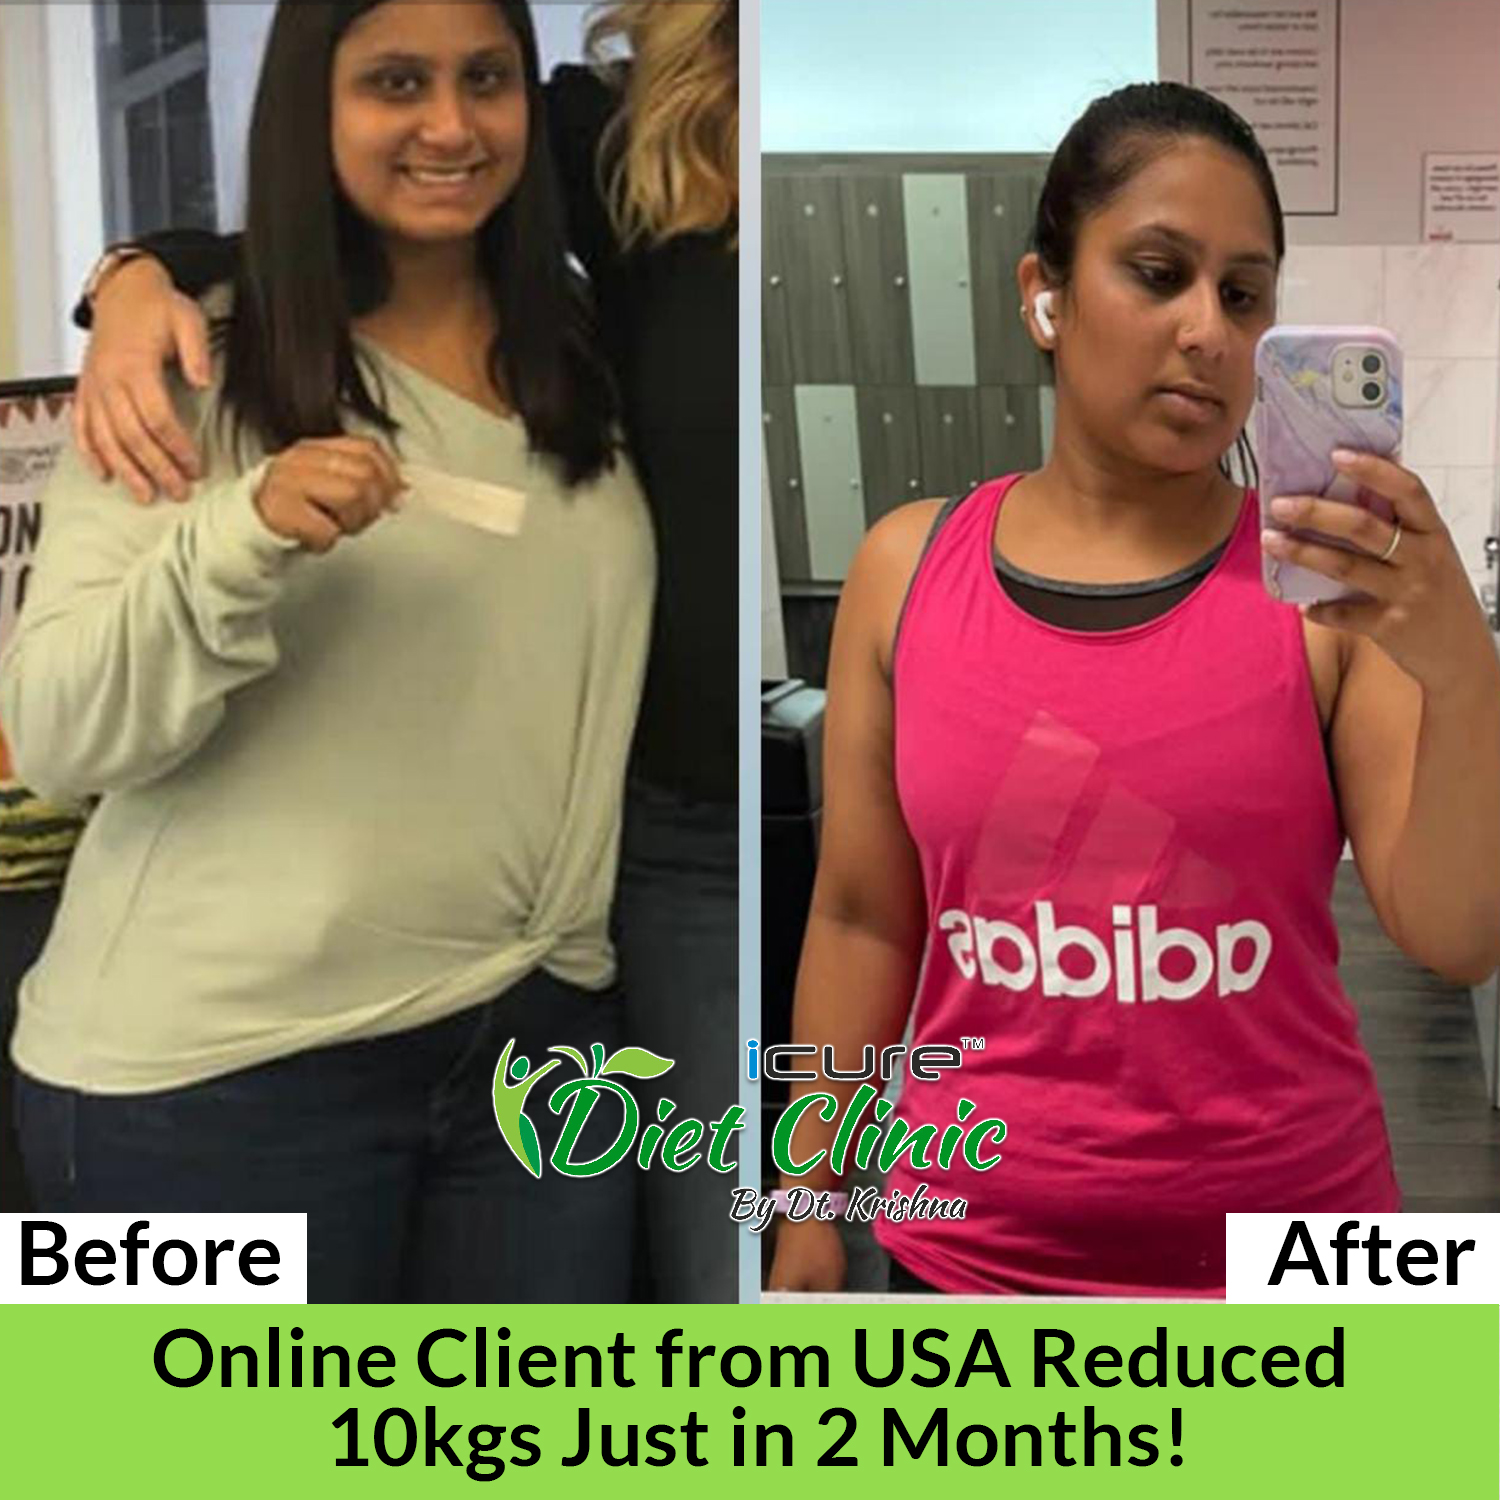 Online client from USA lost 10 kgs in 2 months